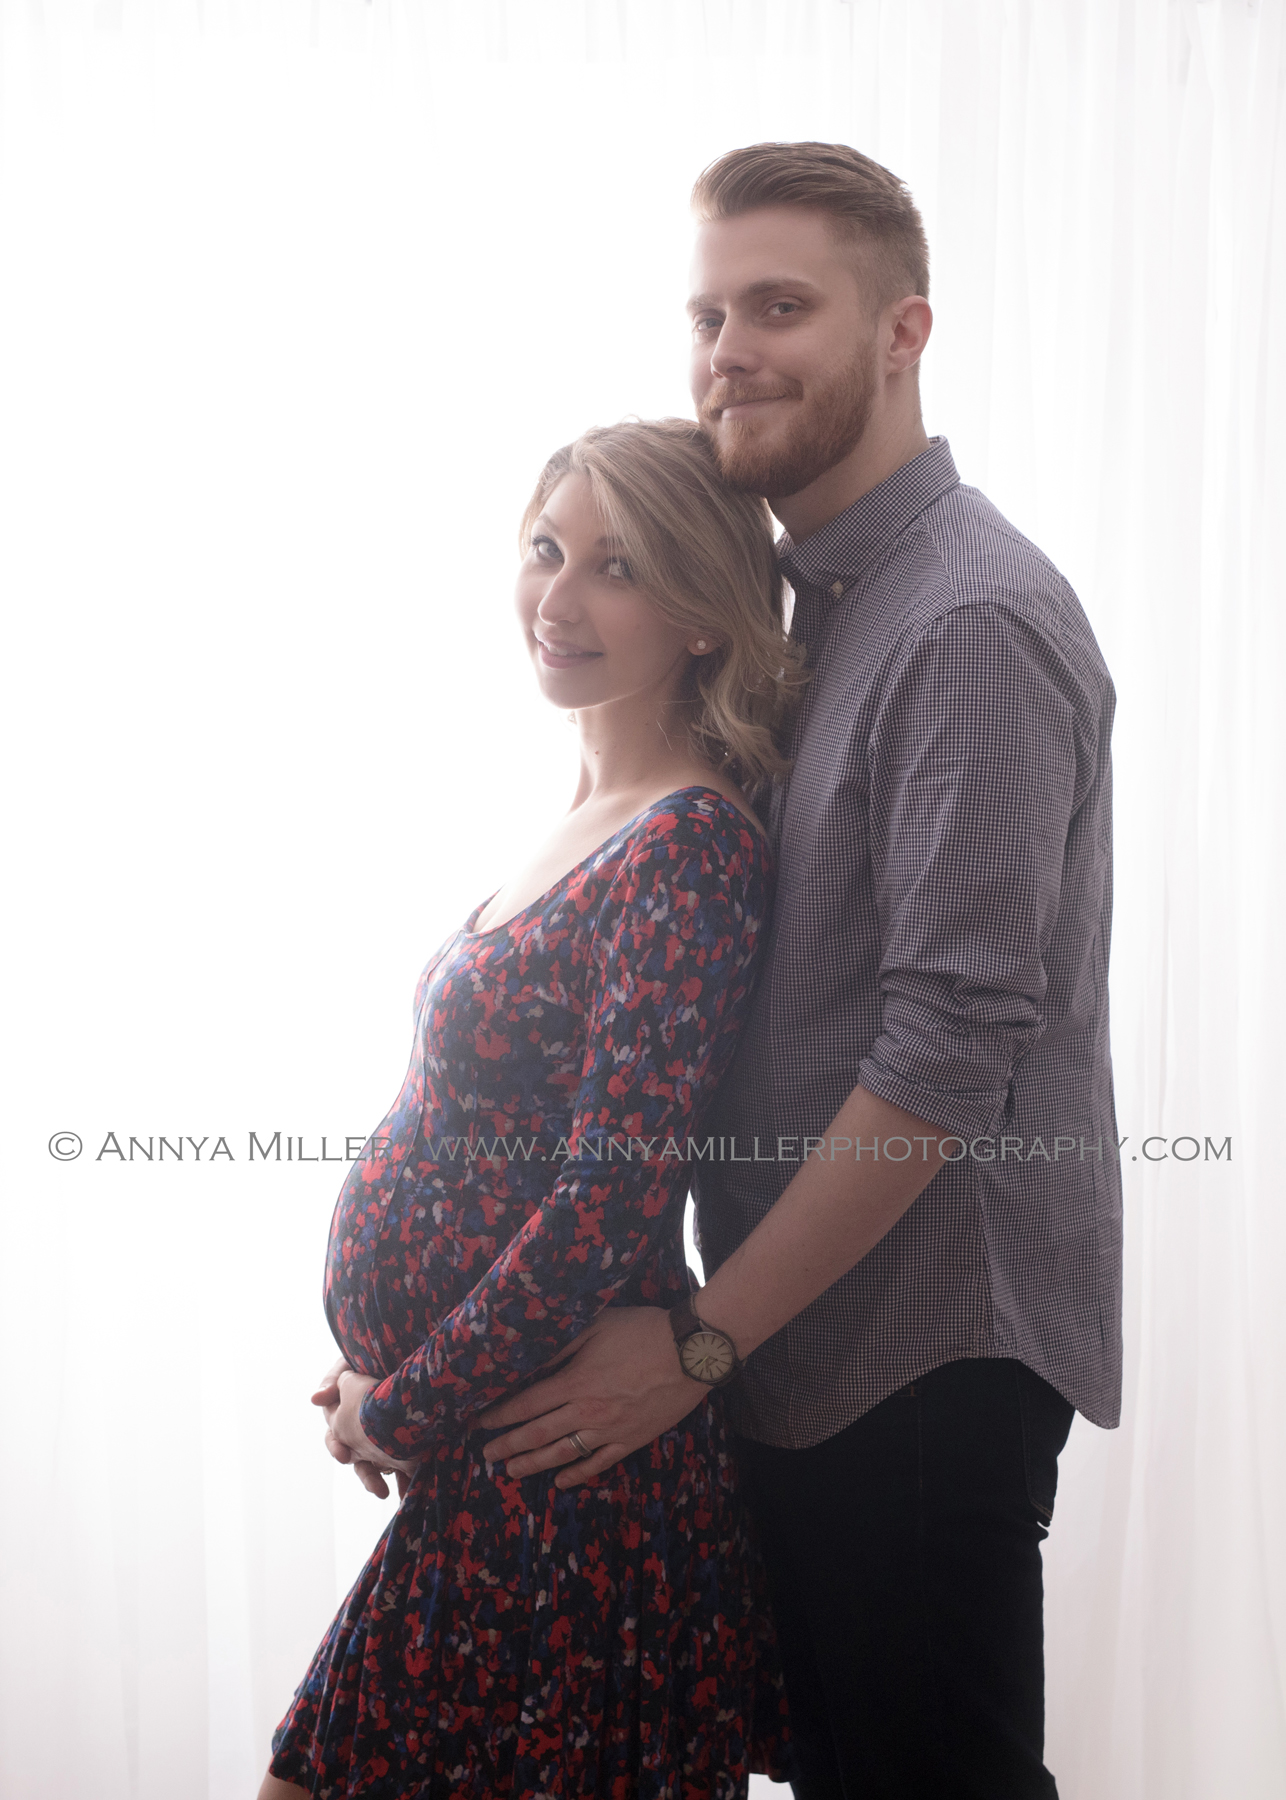 Maternity photography in Durham region by Annya Miller of Pickering